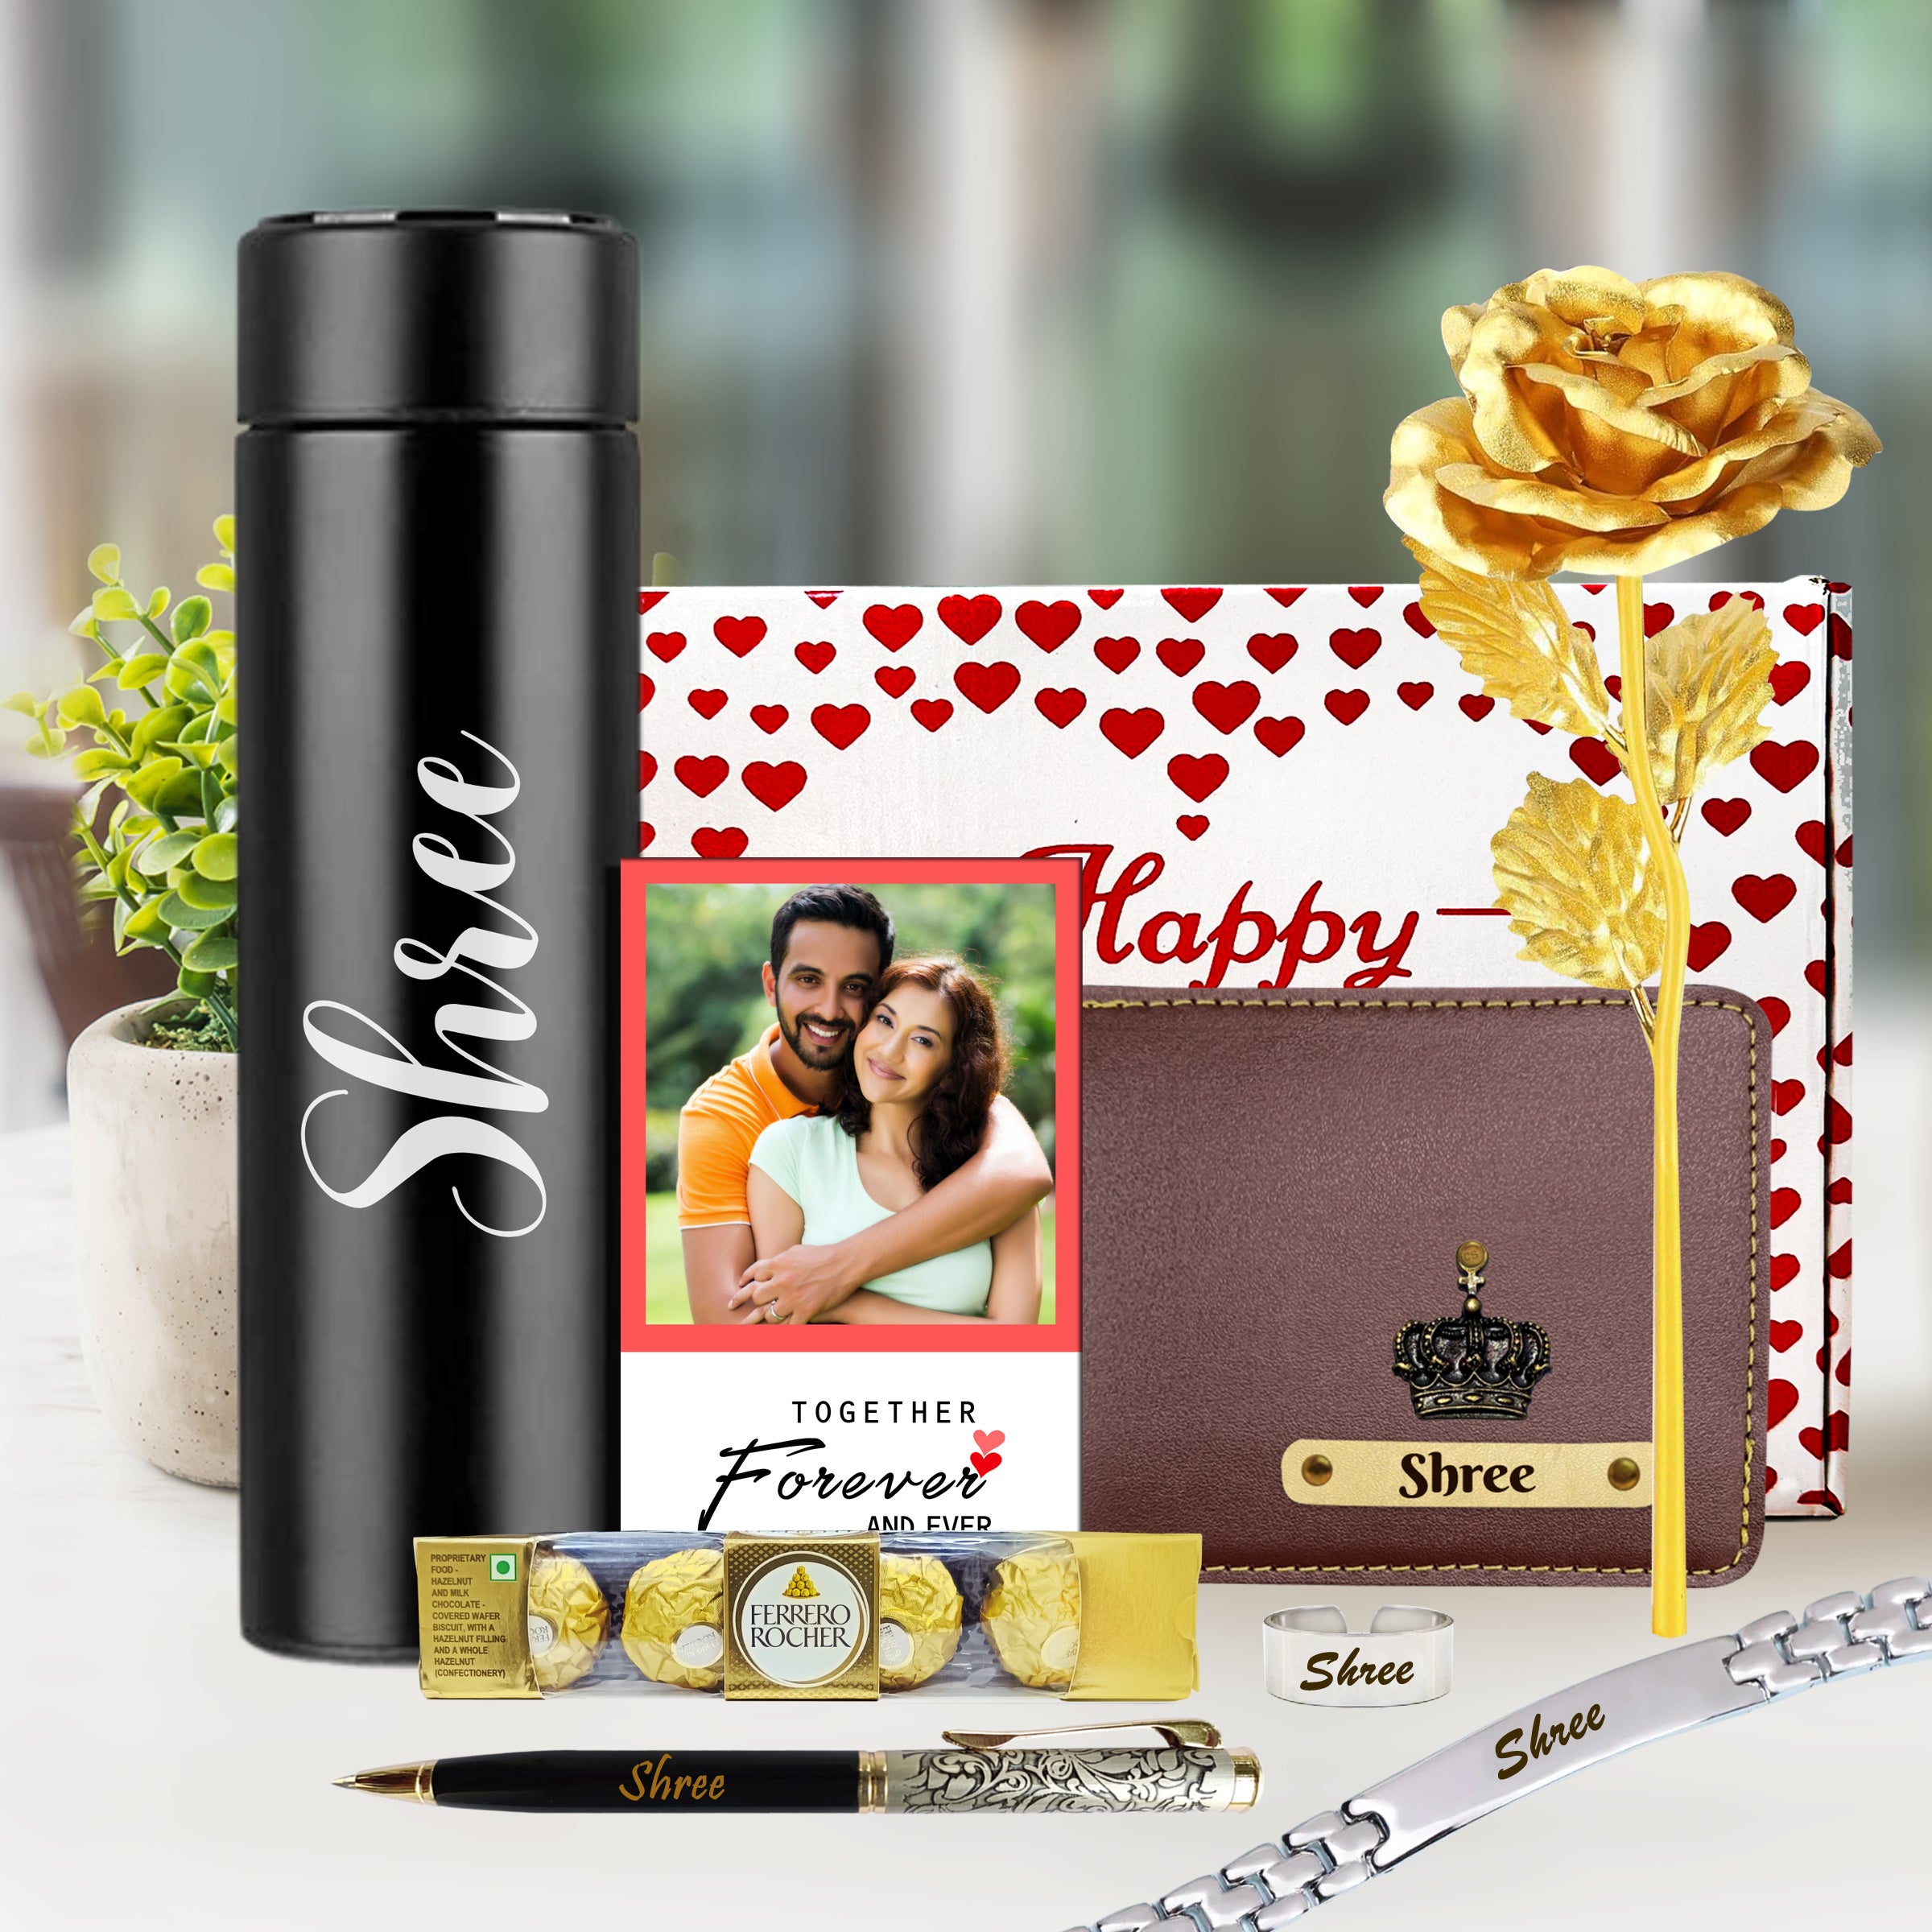 Buy ME & YOU Romantic Gift Combo|Valentine's Gift for Wife/Girlfriend/ Boyfriend/Husband|Rose Day, Propose Day Gift|Anniversary, Birthday Love Gift|Valentines  Romantic Gift|Printed Cushion(12 * 12ich)| Online at Low Prices in India -  Amazon.in